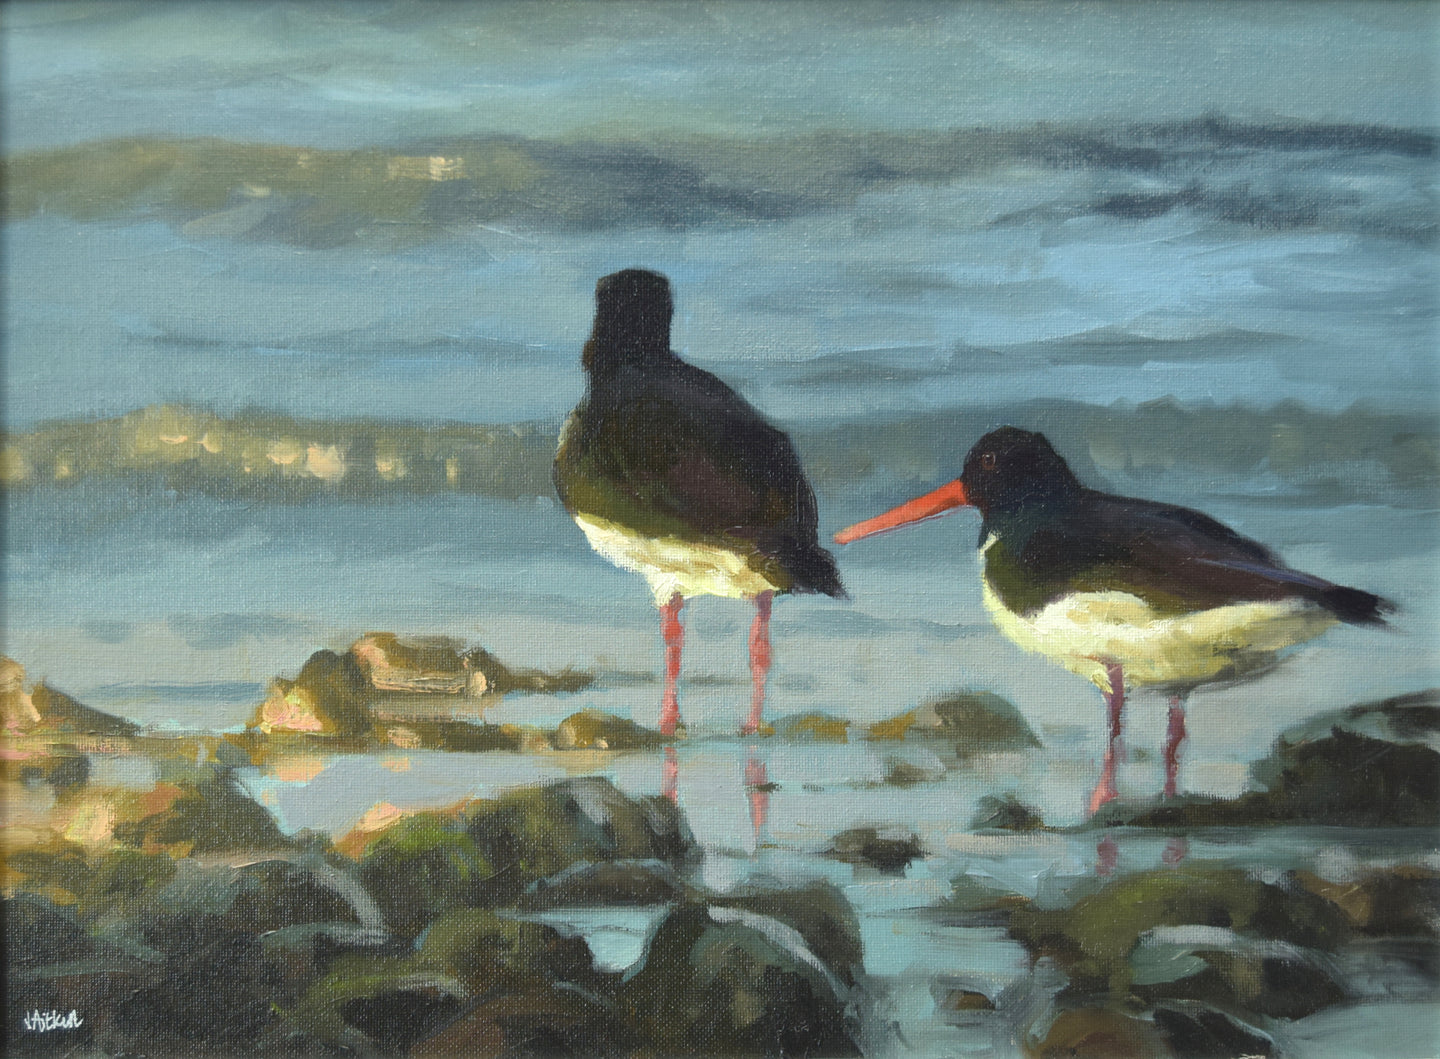 12 x 16 inch Oil painting of a pair of Oystercatchers, paddling on the shoreline amongst stones, with light waves washing in, their red beaks and legs a colourful foil against the blue-green water.